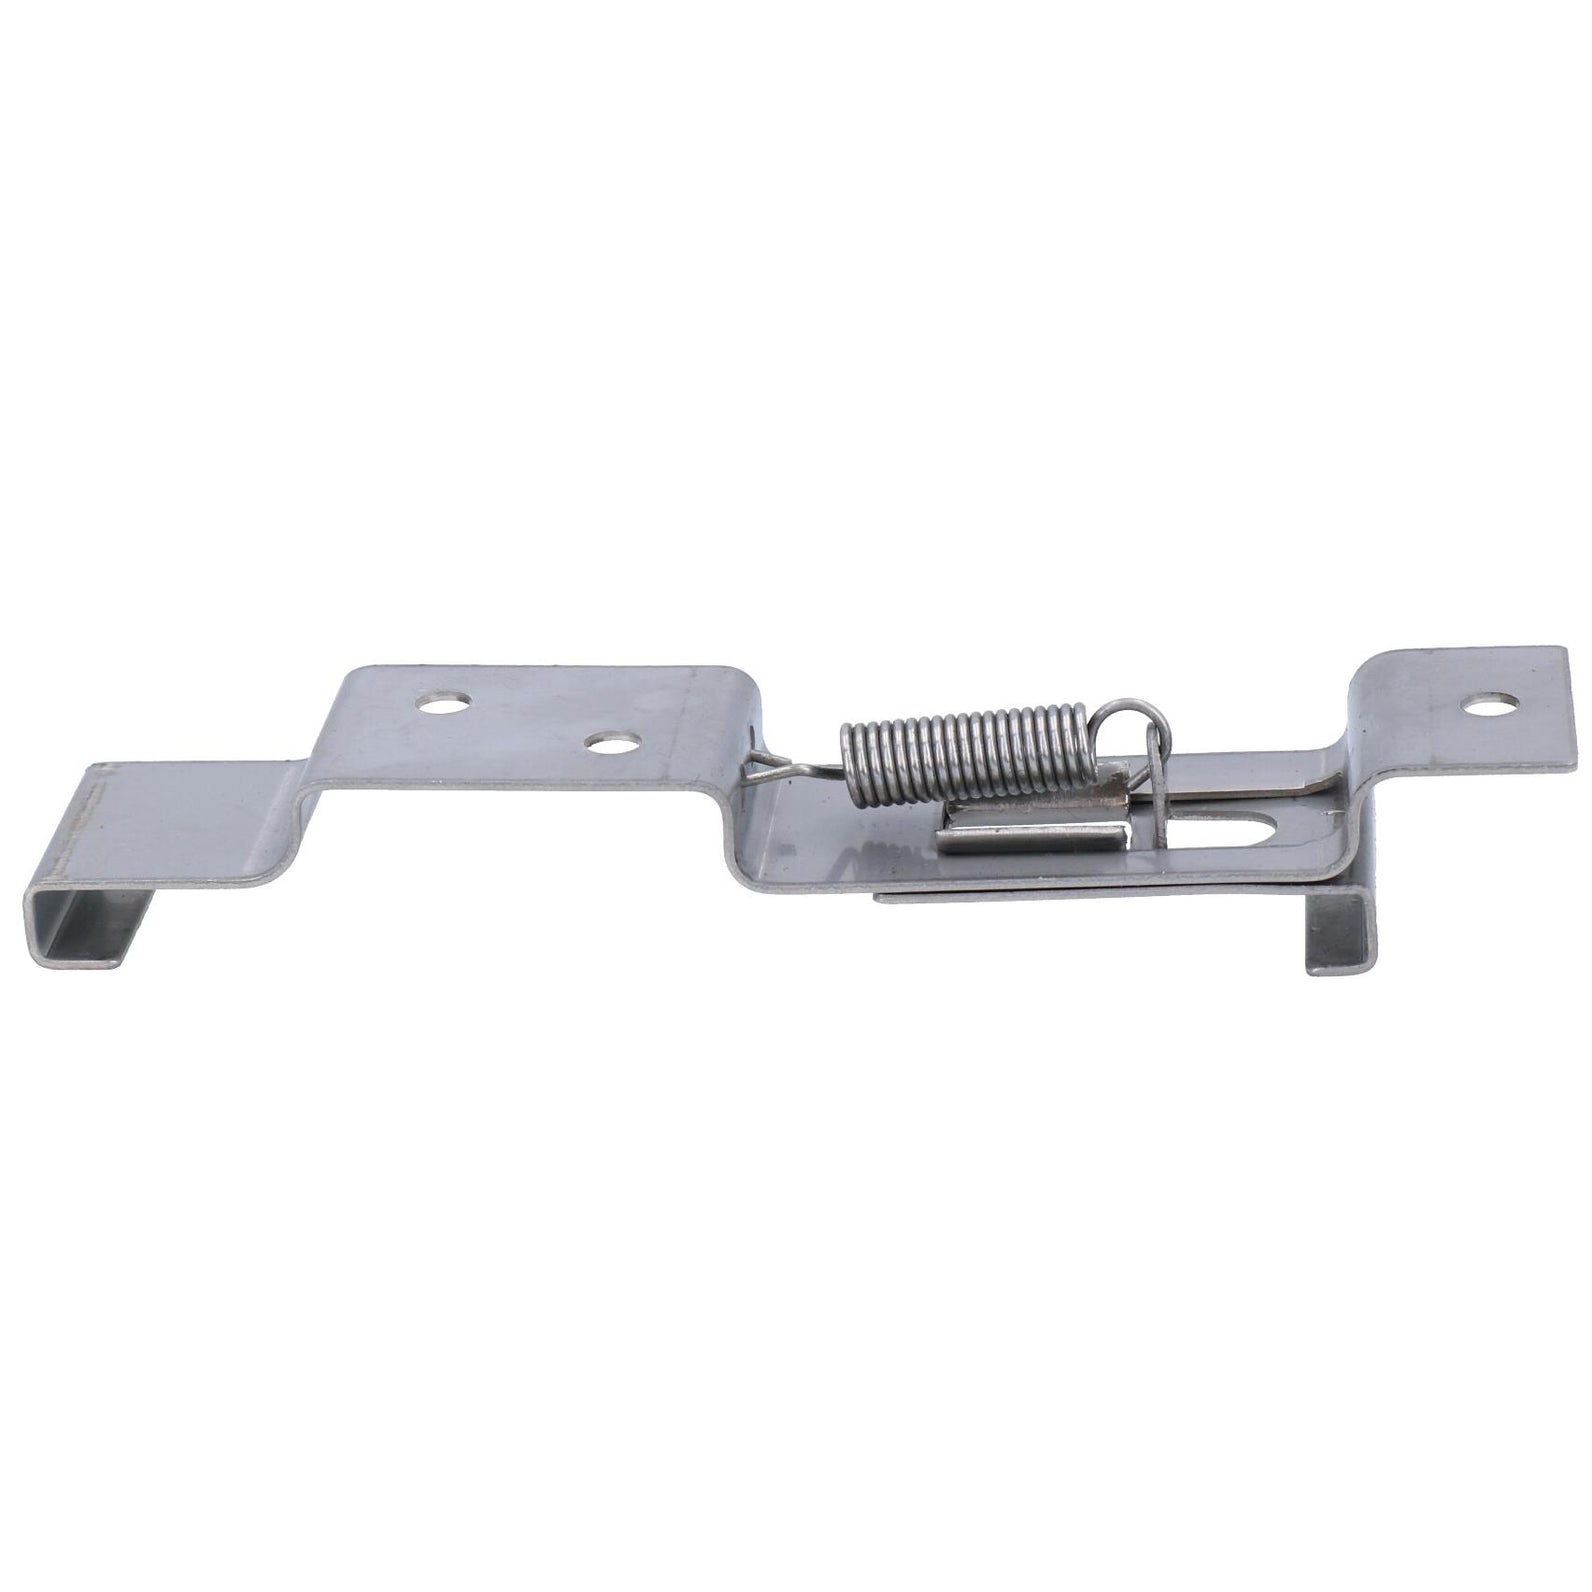 Trailer Number Plate Clips / Holder Spring Loaded Stainless Steel PAIR TR112